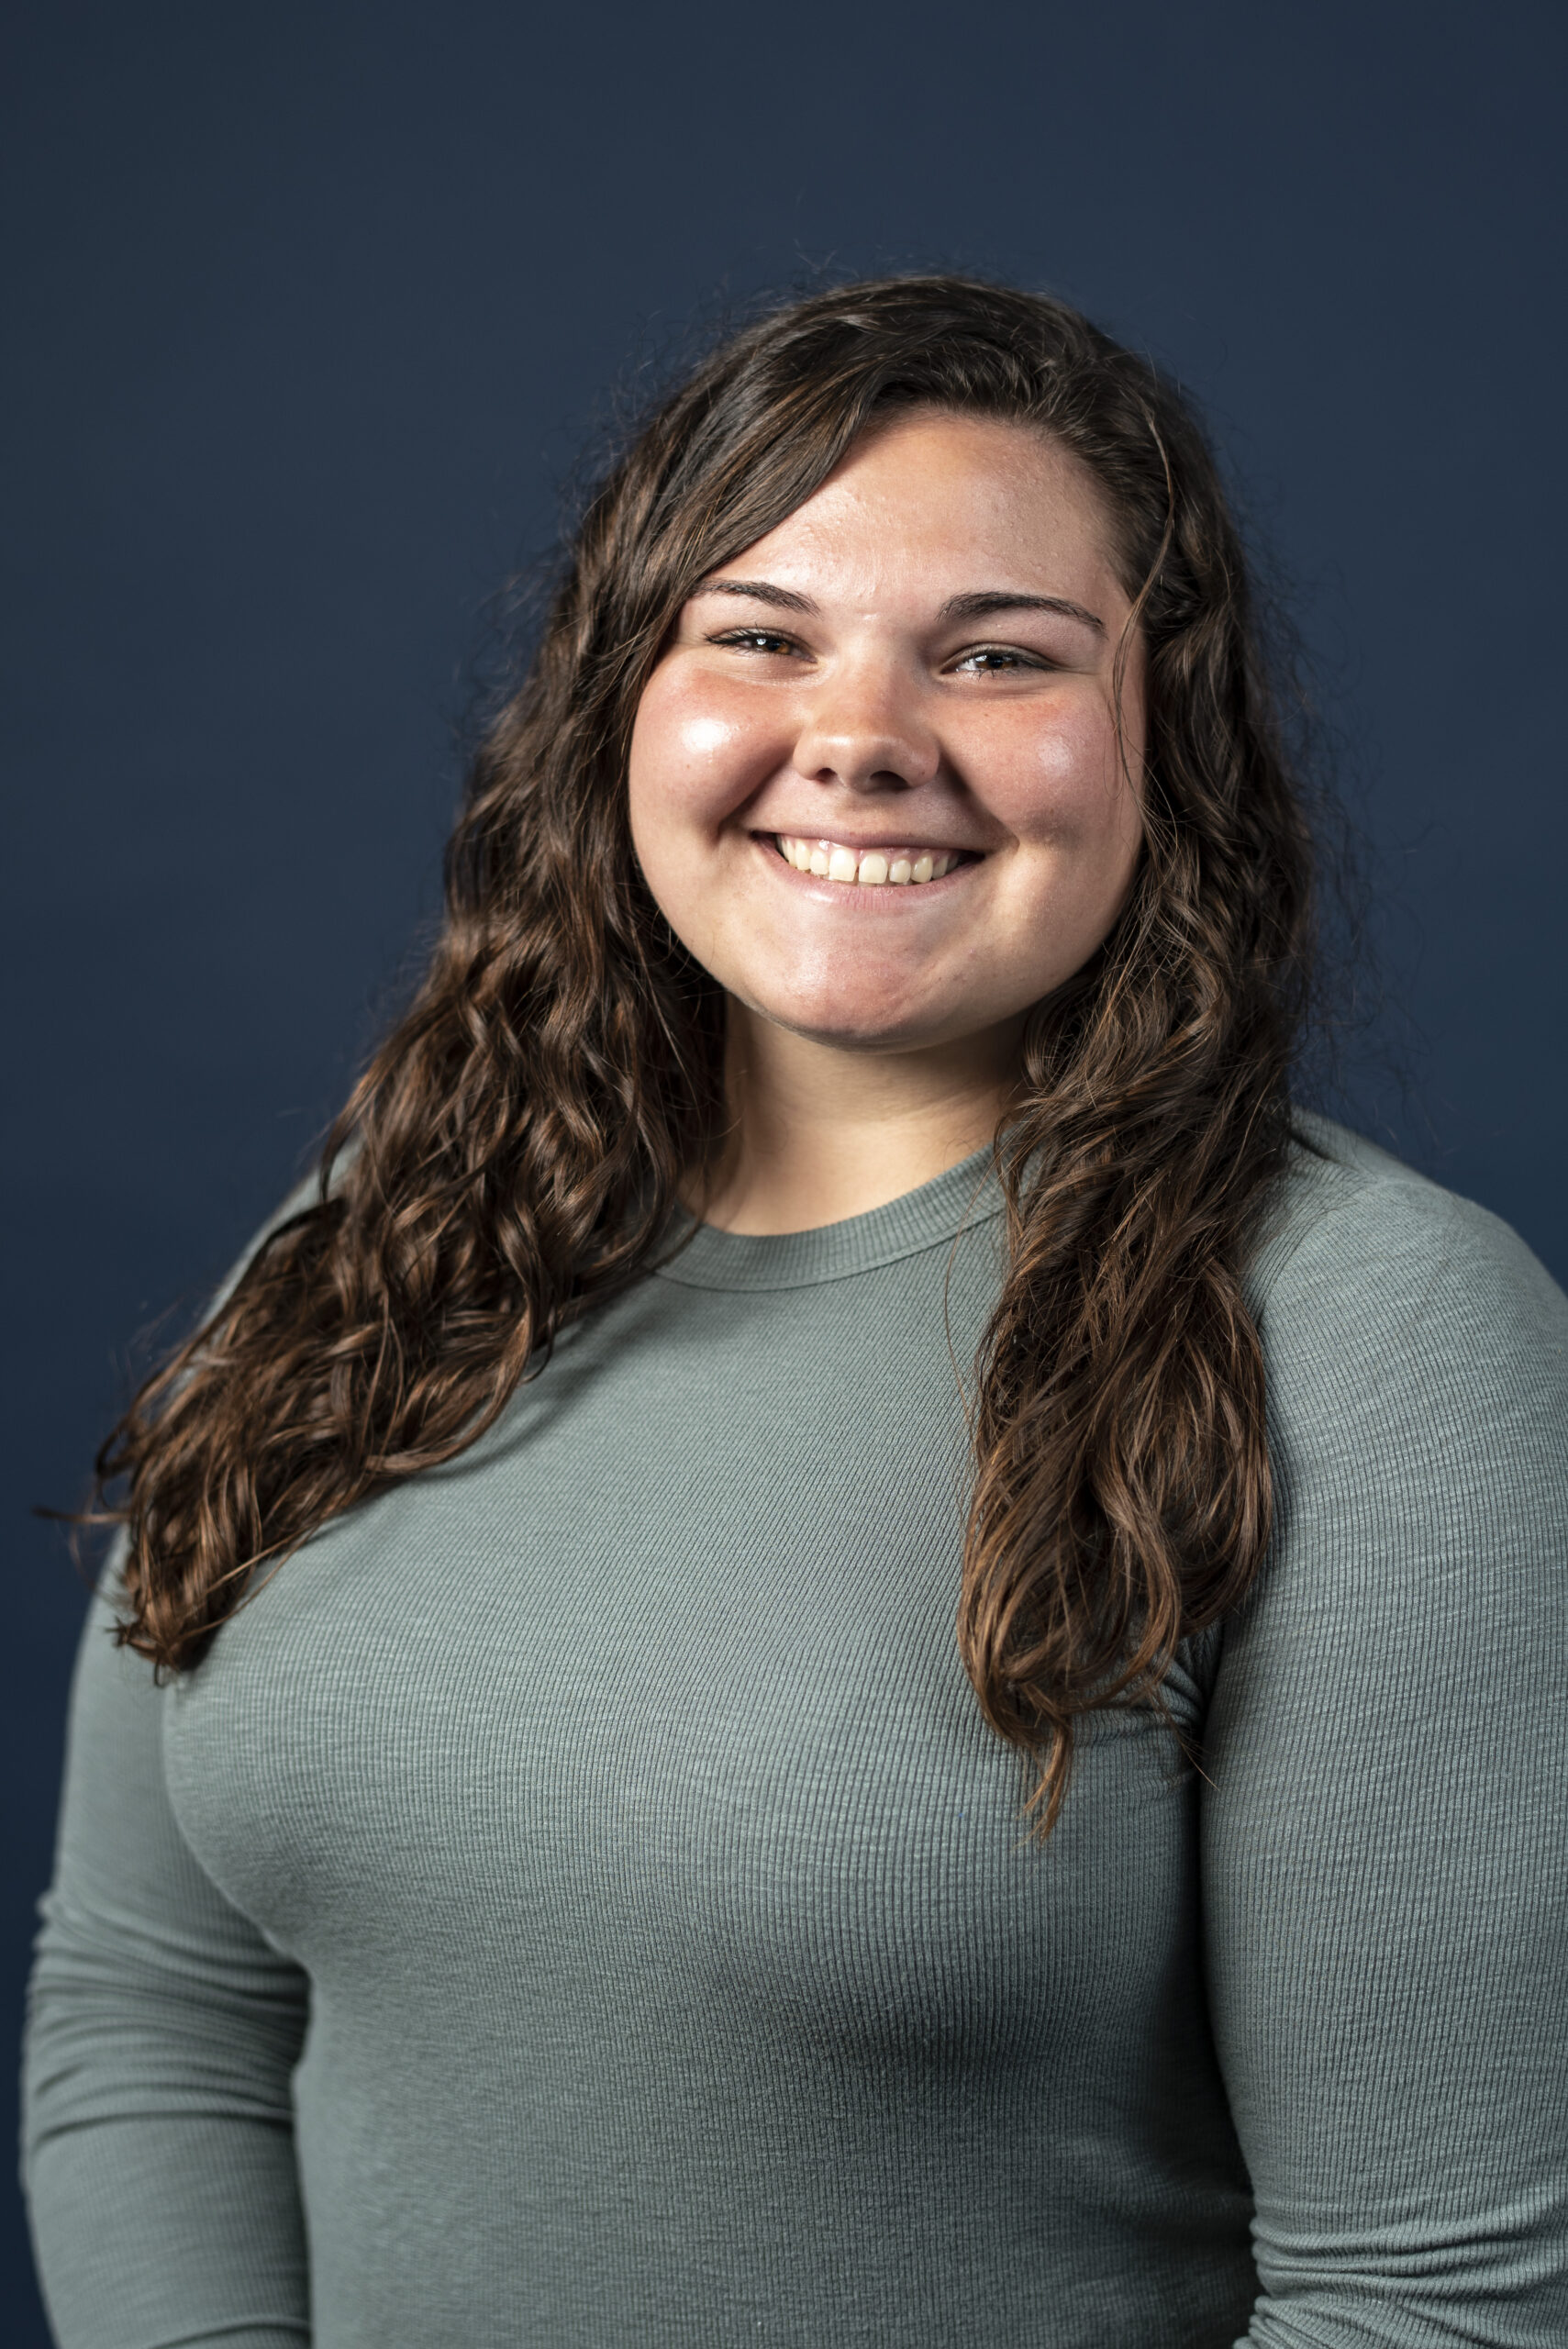 "Thank you so much for your generous support! It has allowed me not only to fully engage in education at North Park, but also in the vast opportunities that can be found within the great city of Chicago." —Sydney Depauw, Athletic Training, C’22